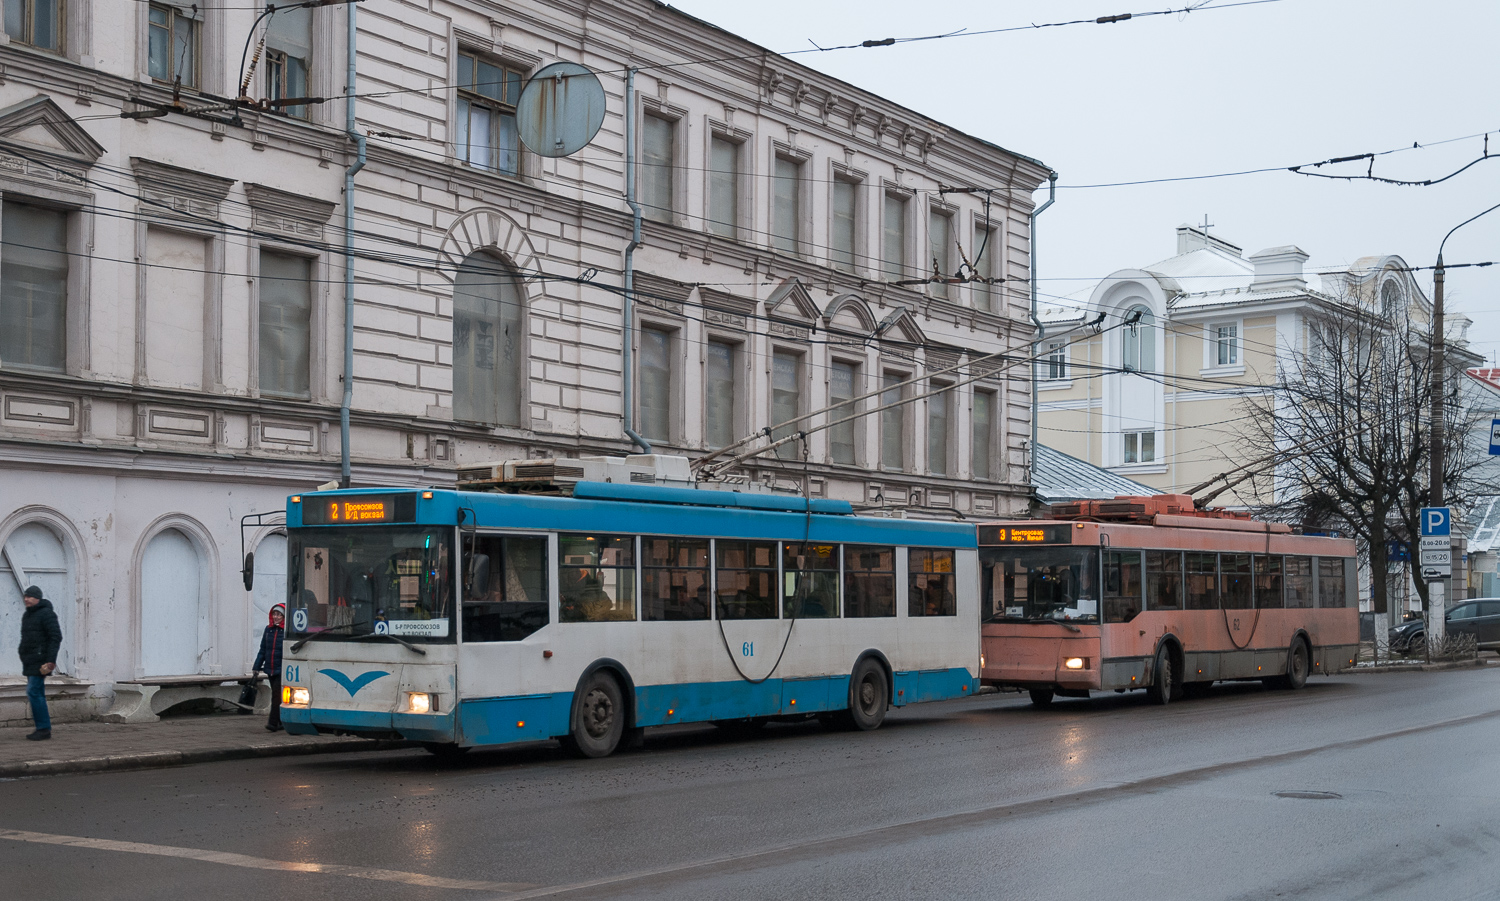 Tver, Trolza-5275.05 “Optima” № 61; Tver — Trolleybus lines: Central district